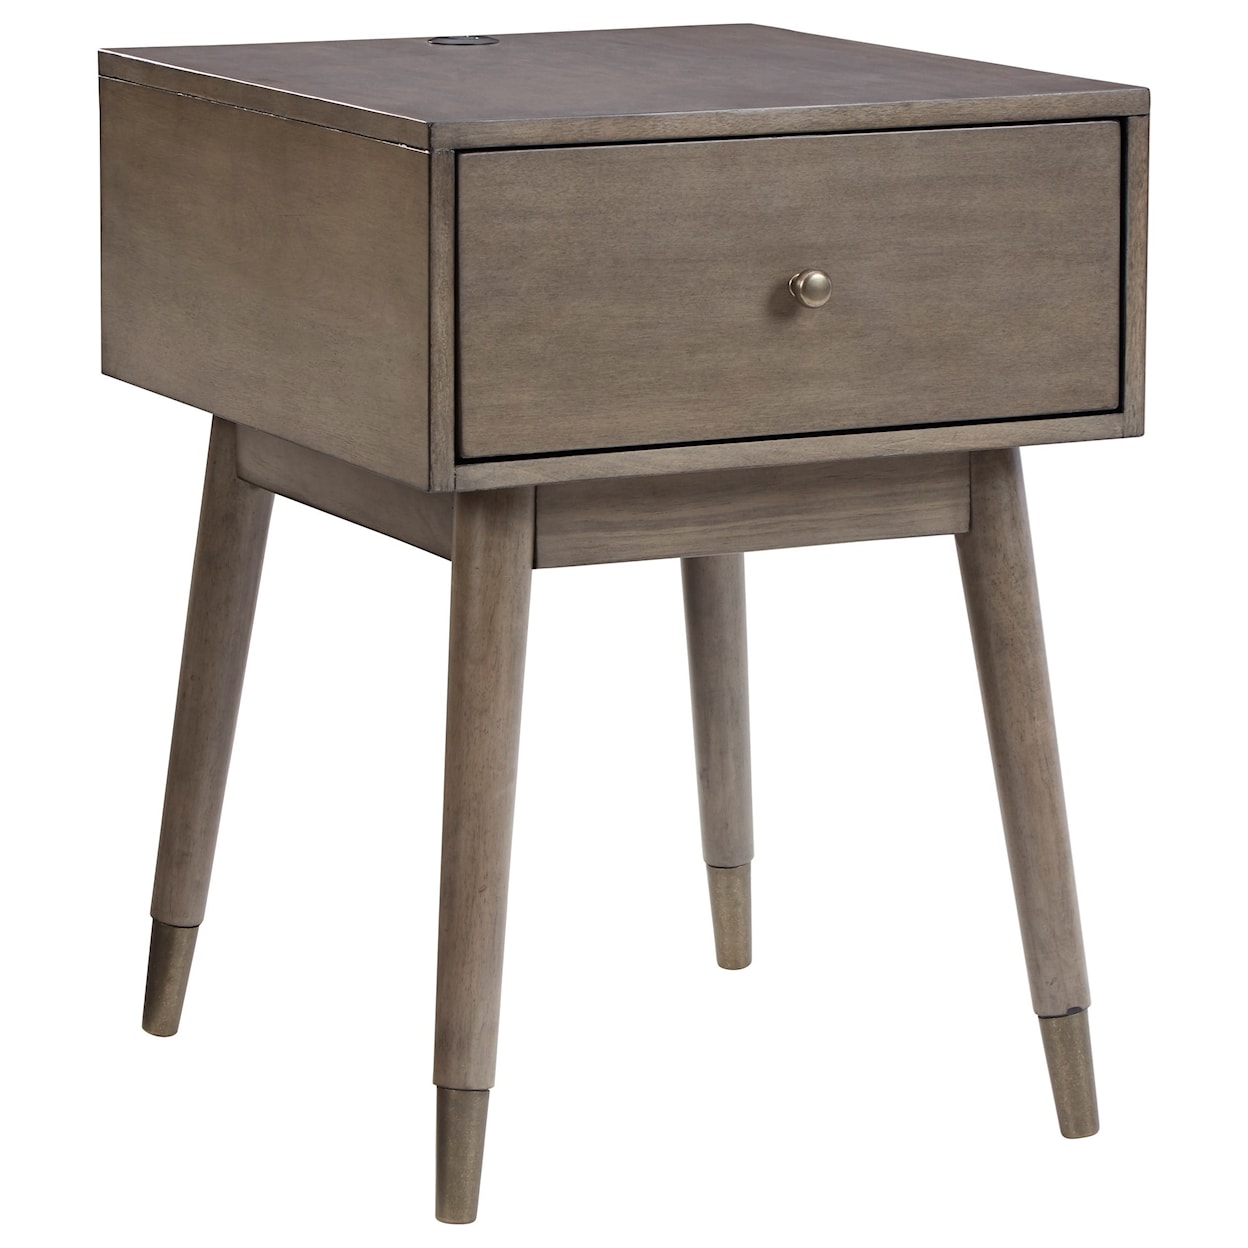 Benchcraft Paulrich Accent Table